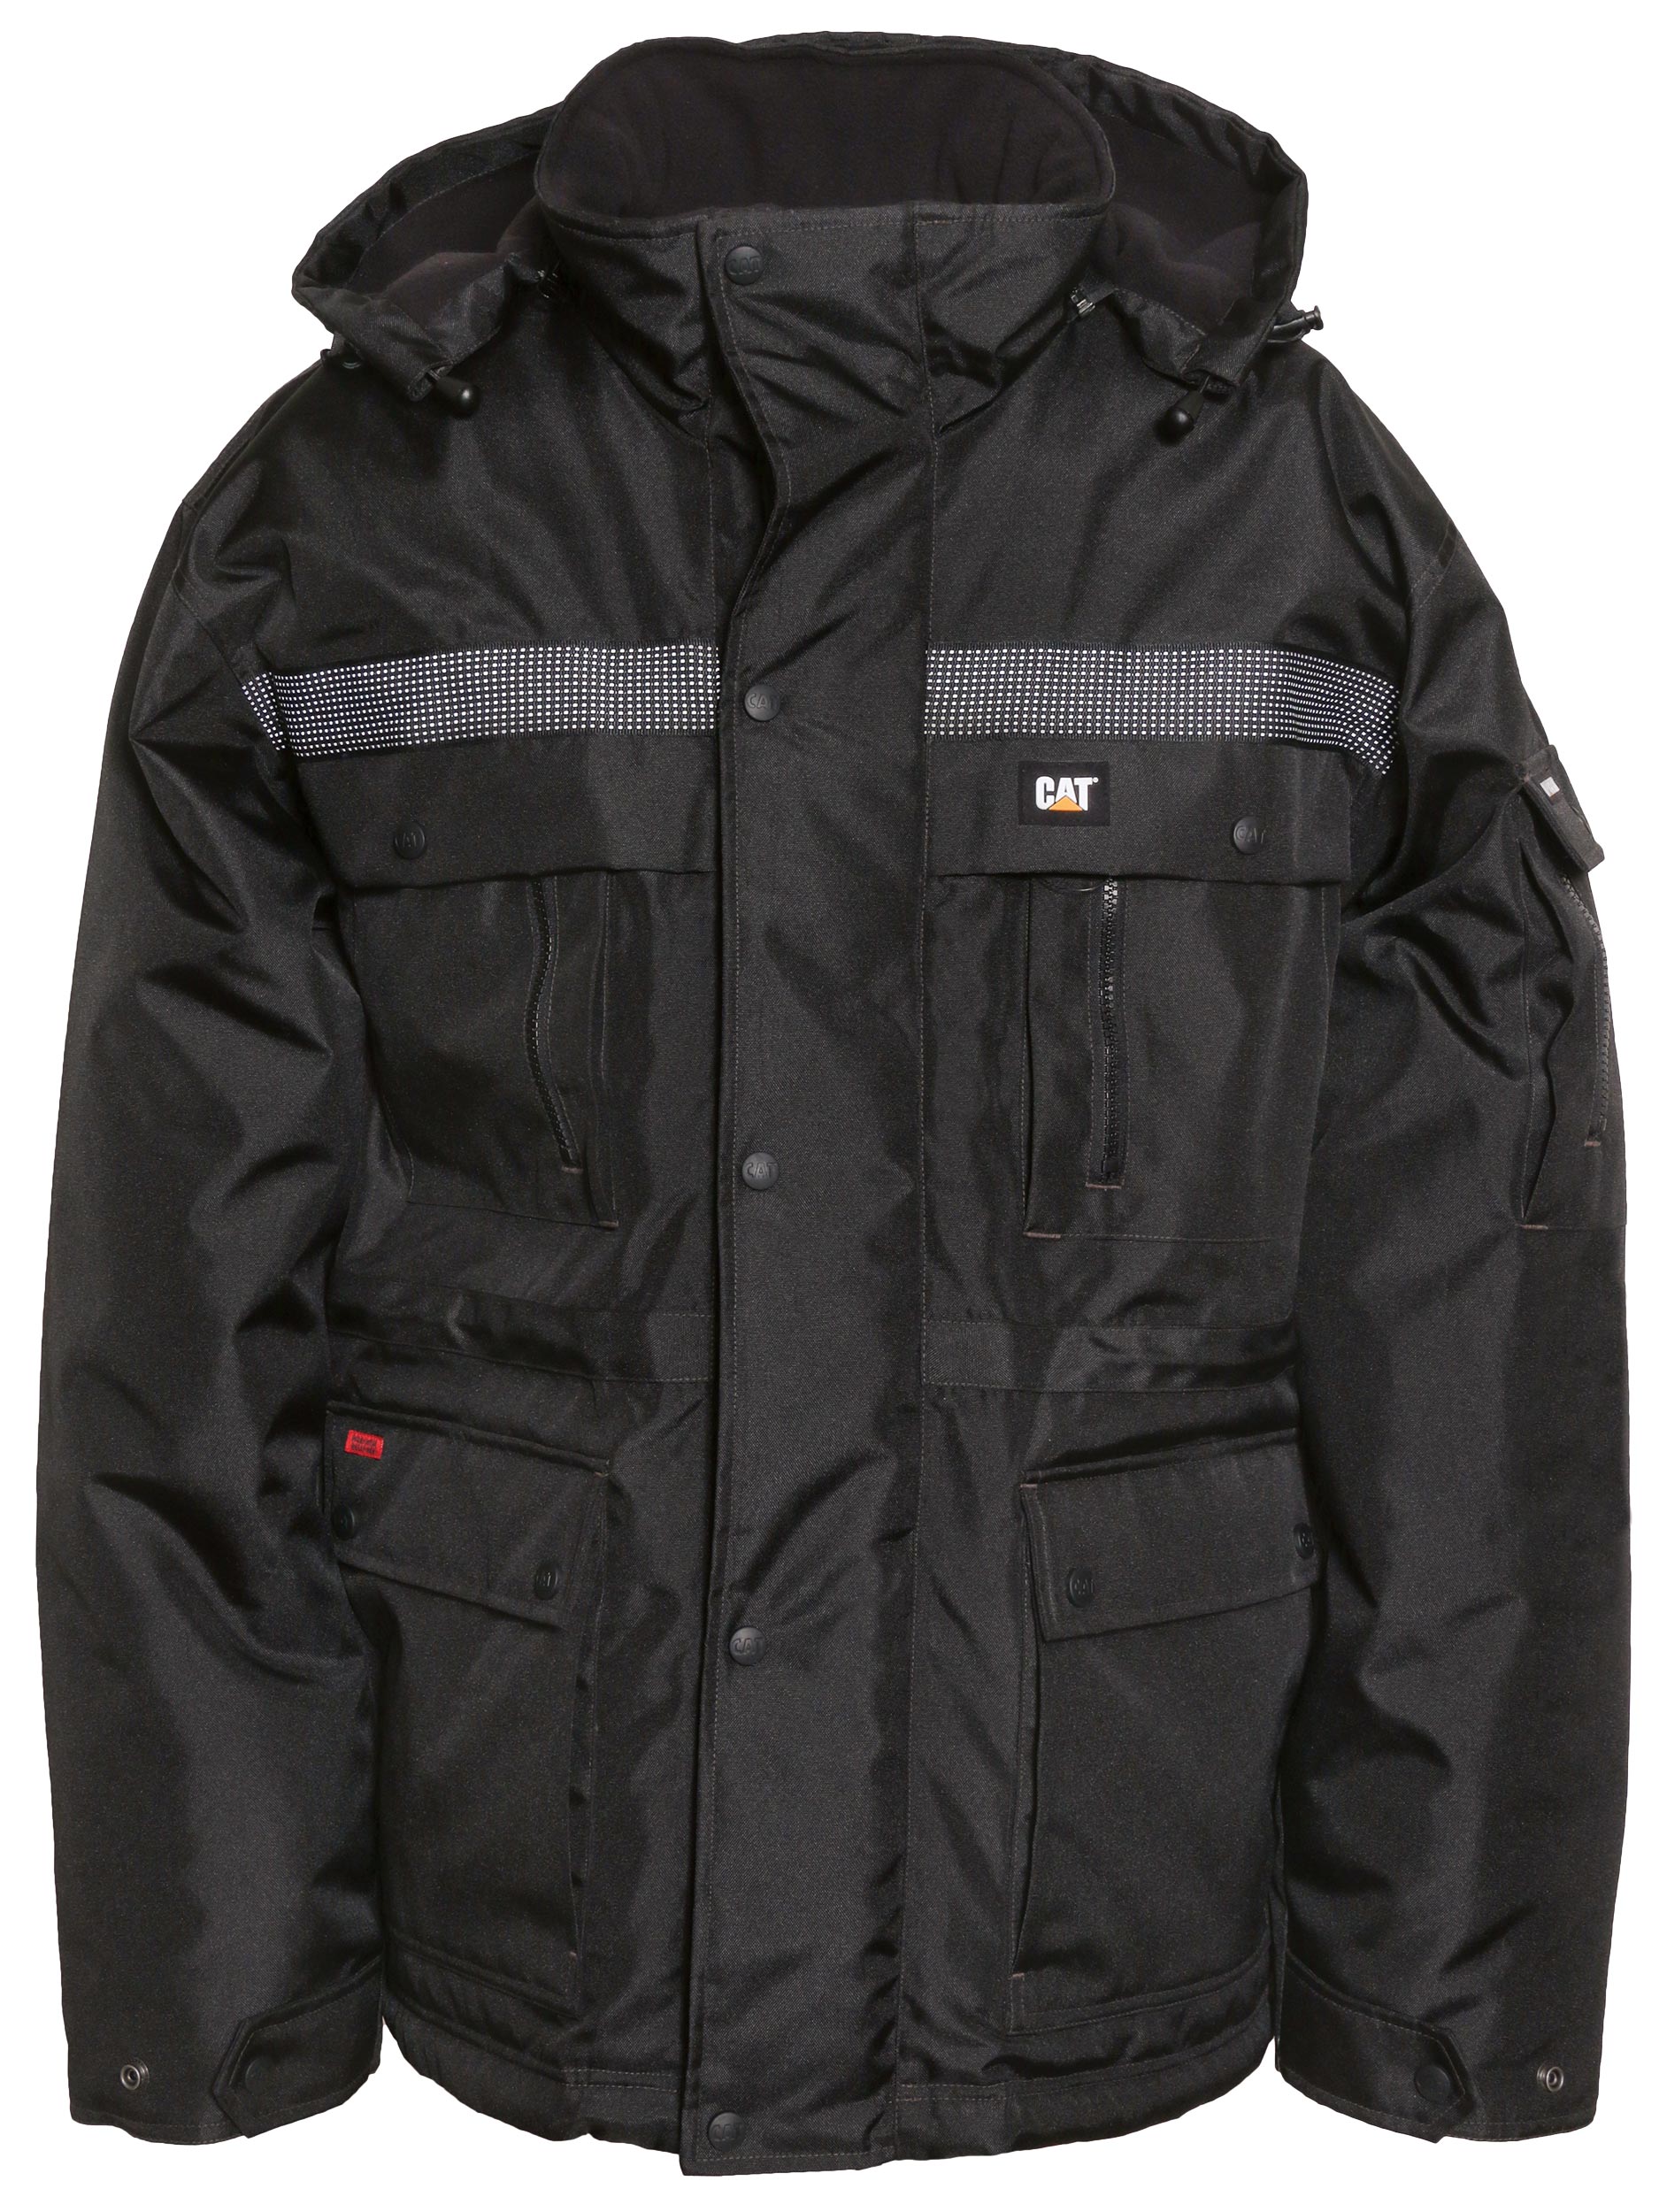 Caterpillar Men's Big and Tall Heavy Insulated Parka (Regular and Big &  Tall Sizes)